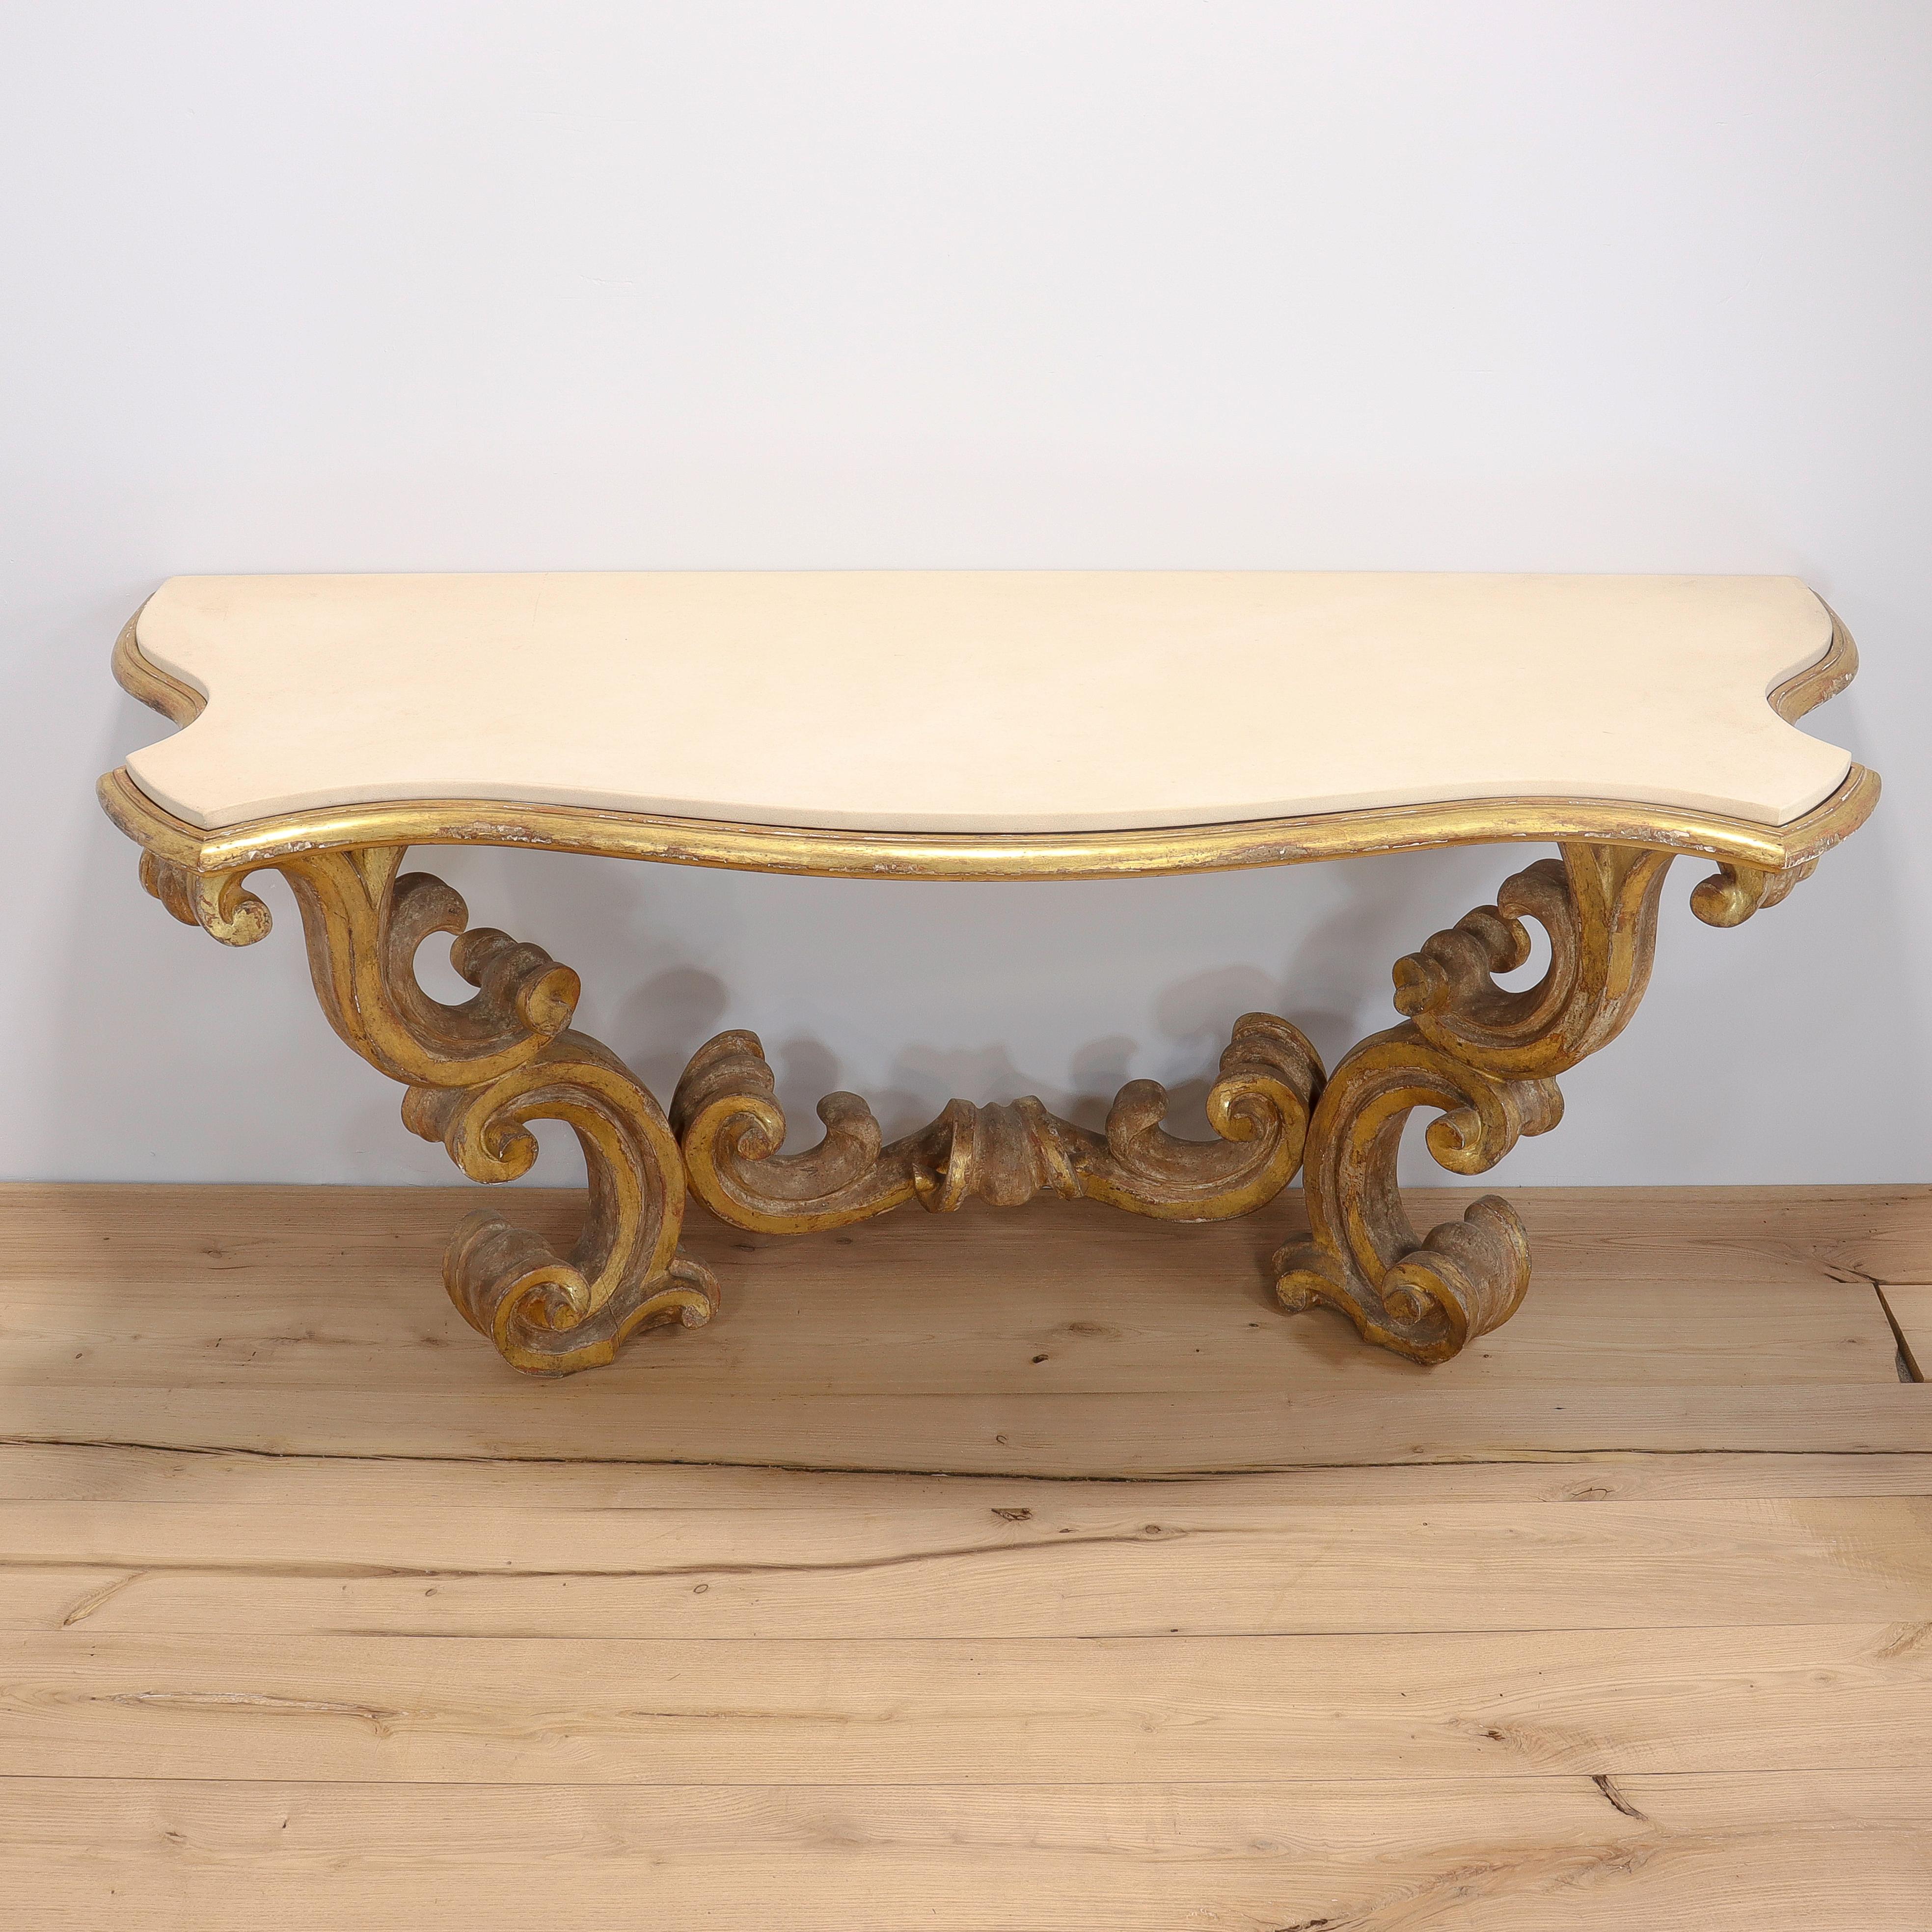 A fine custom made Louis XV or Rococo style table.

With a gessoed and gilt wooden base in the high Rococo style with carved 